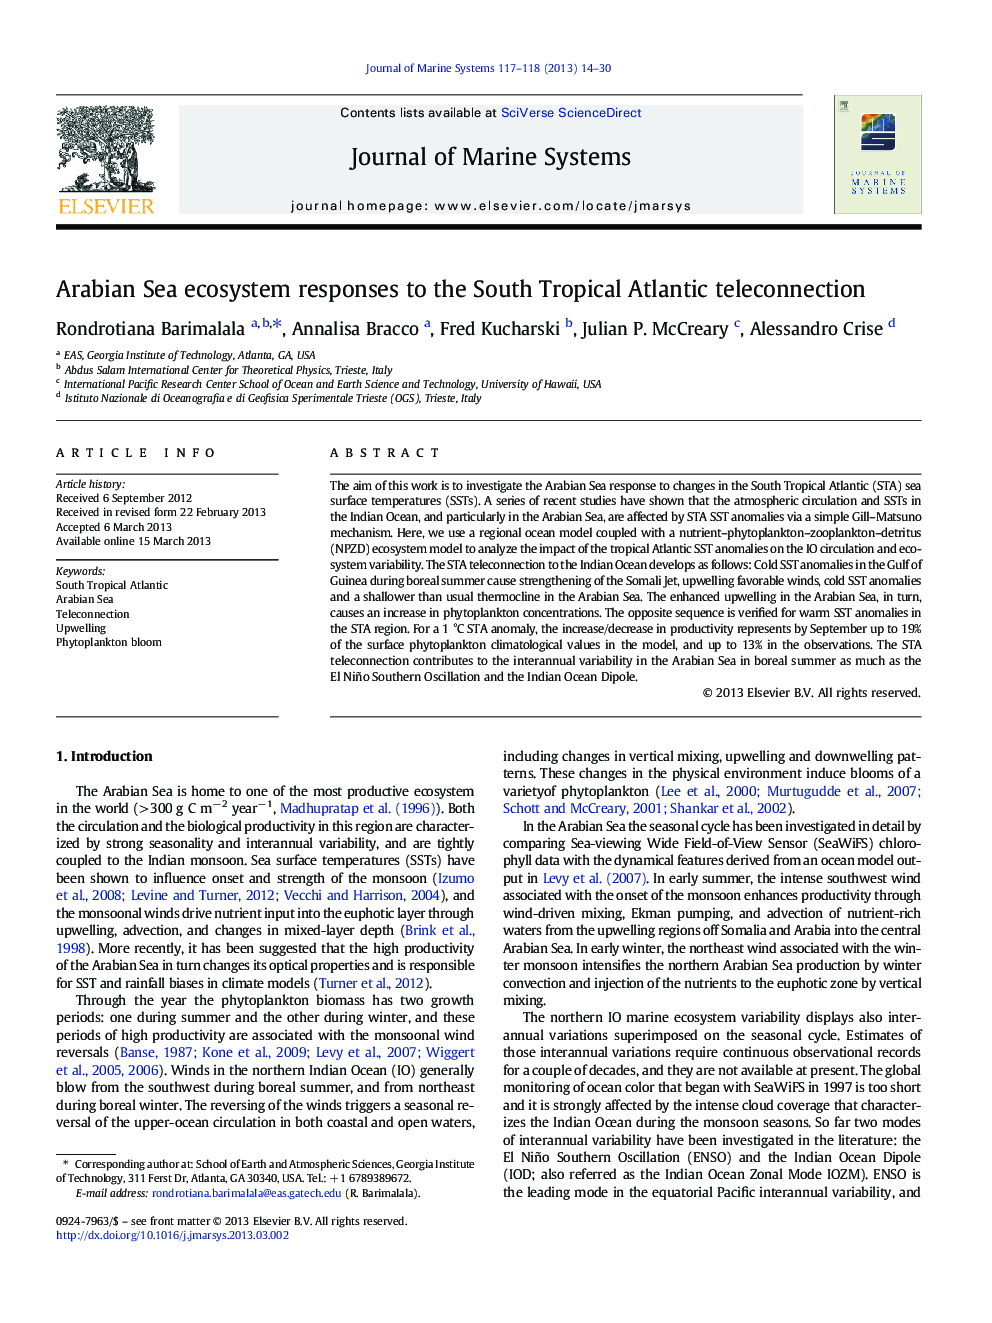 Arabian Sea ecosystem responses to the South Tropical Atlantic teleconnection